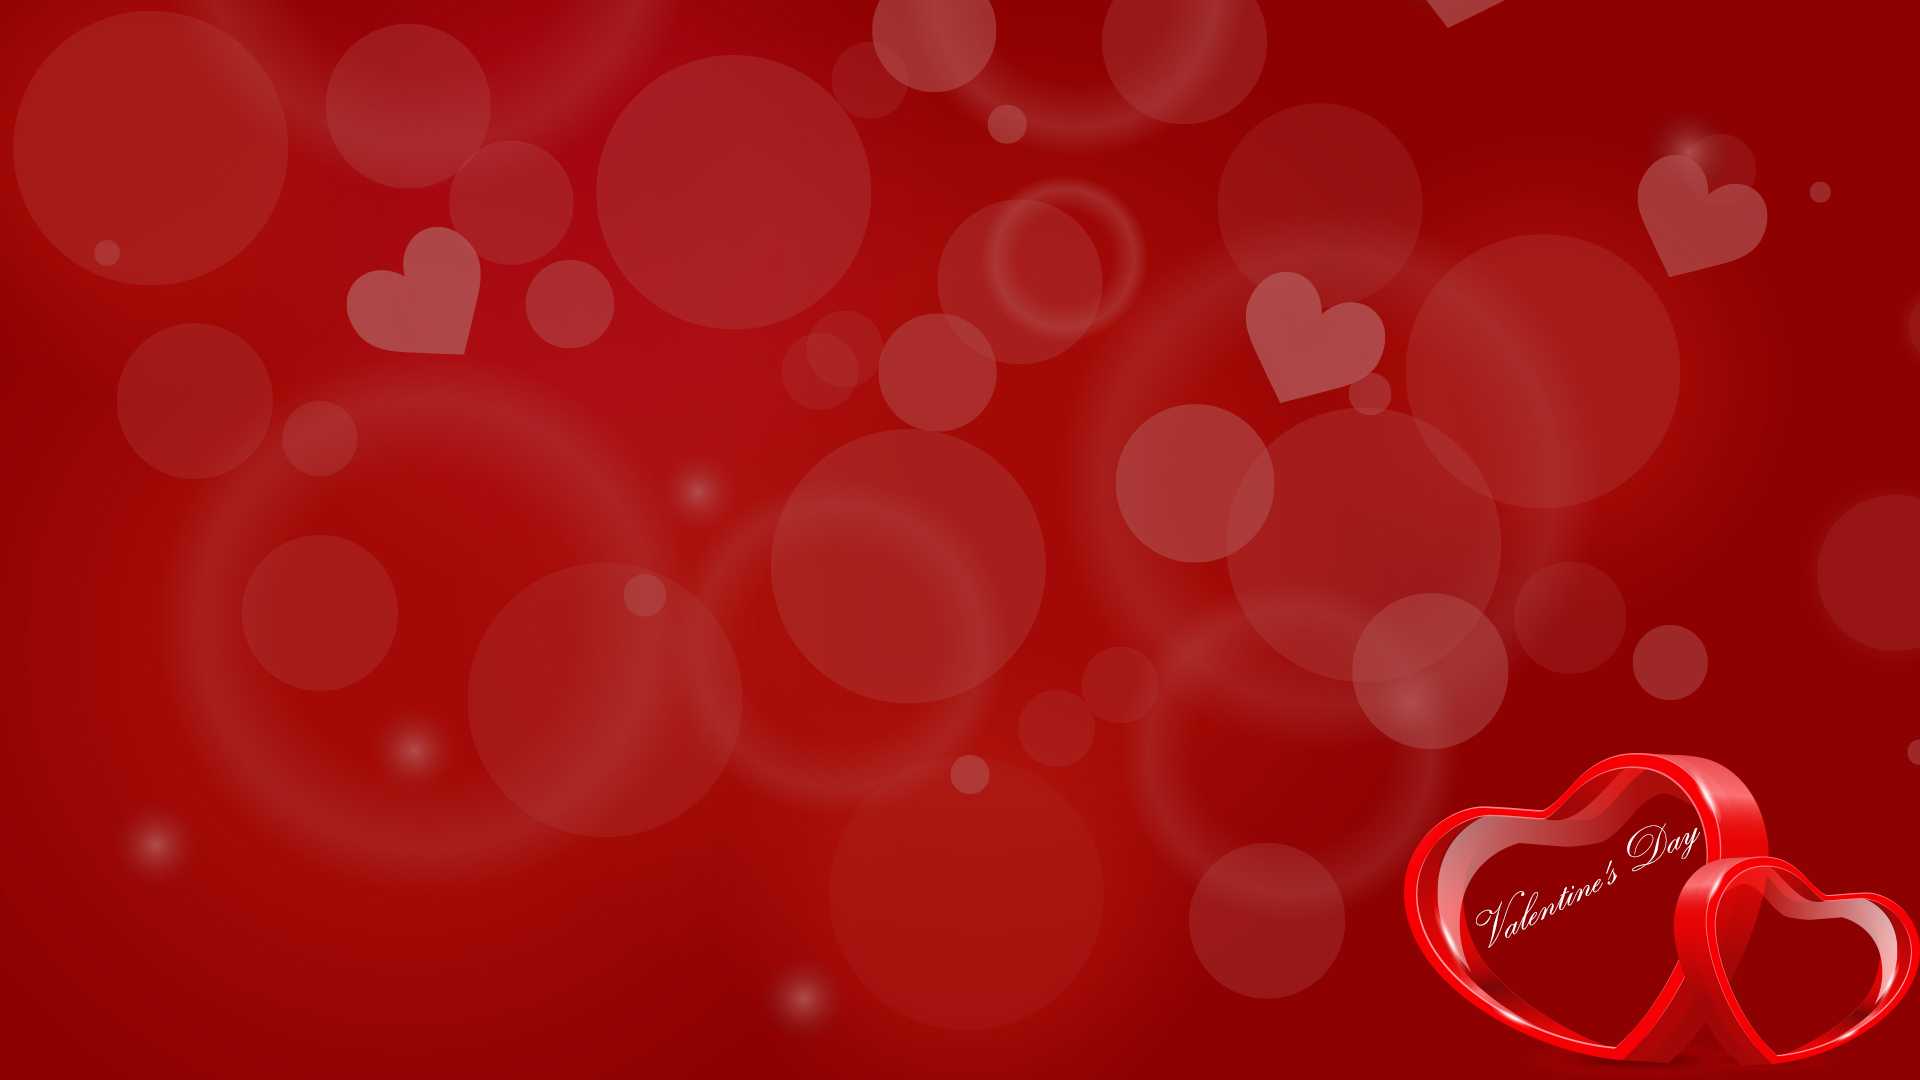 Valentines Day Heart Backgrounds For Powerpoint - Love Ppt For Valentine Powerpoint Templates Free